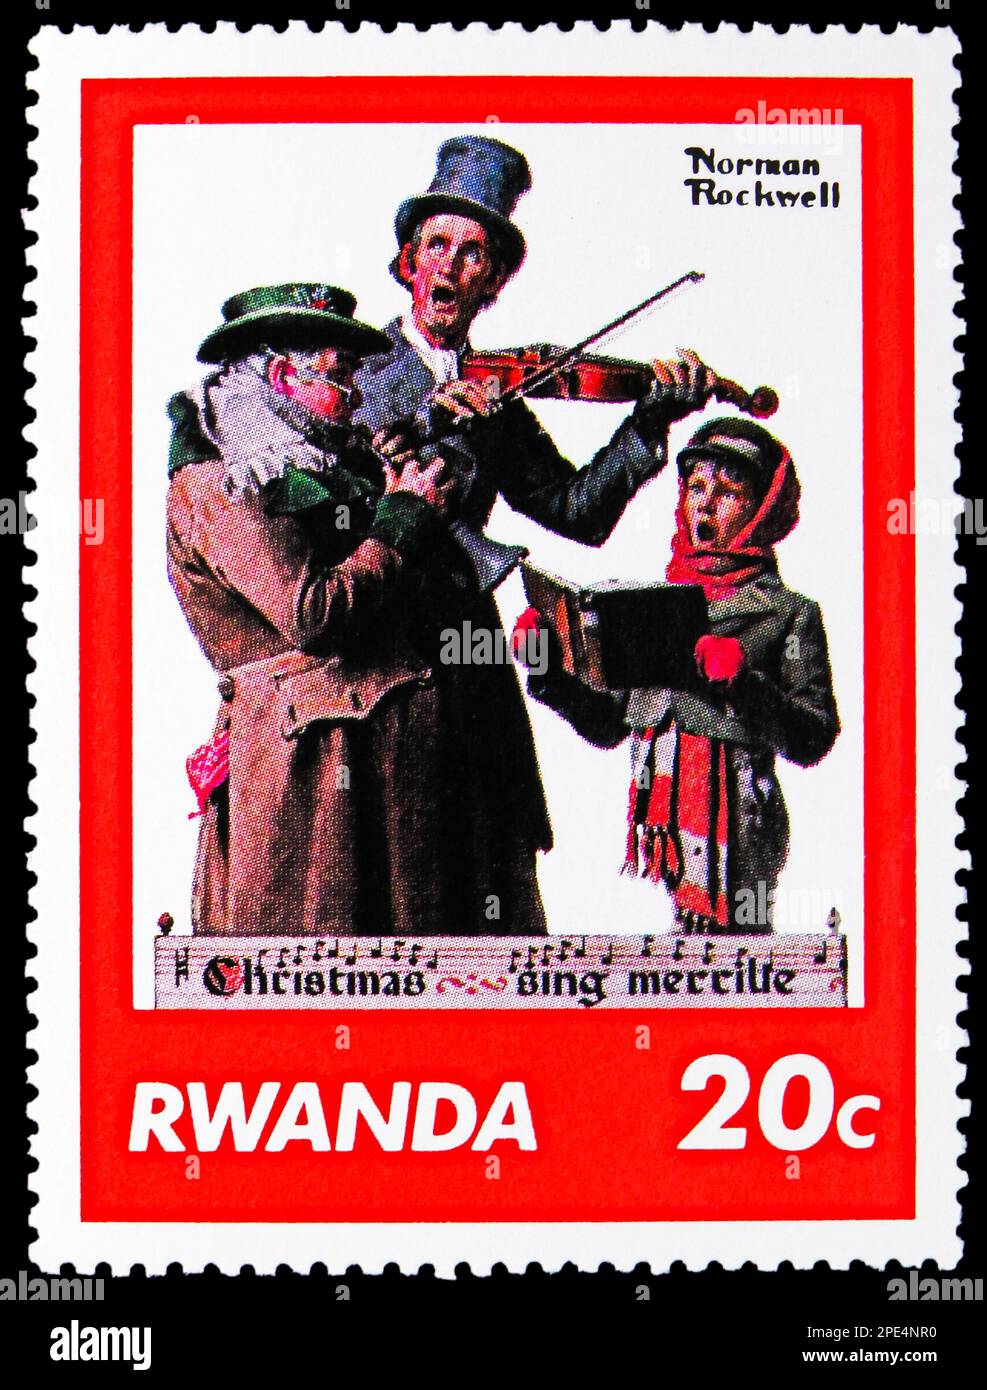 MOSCOW, RUSSIA - FEBRUARY 17, 2023: Postage stamp printed in Rwanda shows Musicians, Paintings by Norman Rockwell serie, circa 1981 Stock Photo